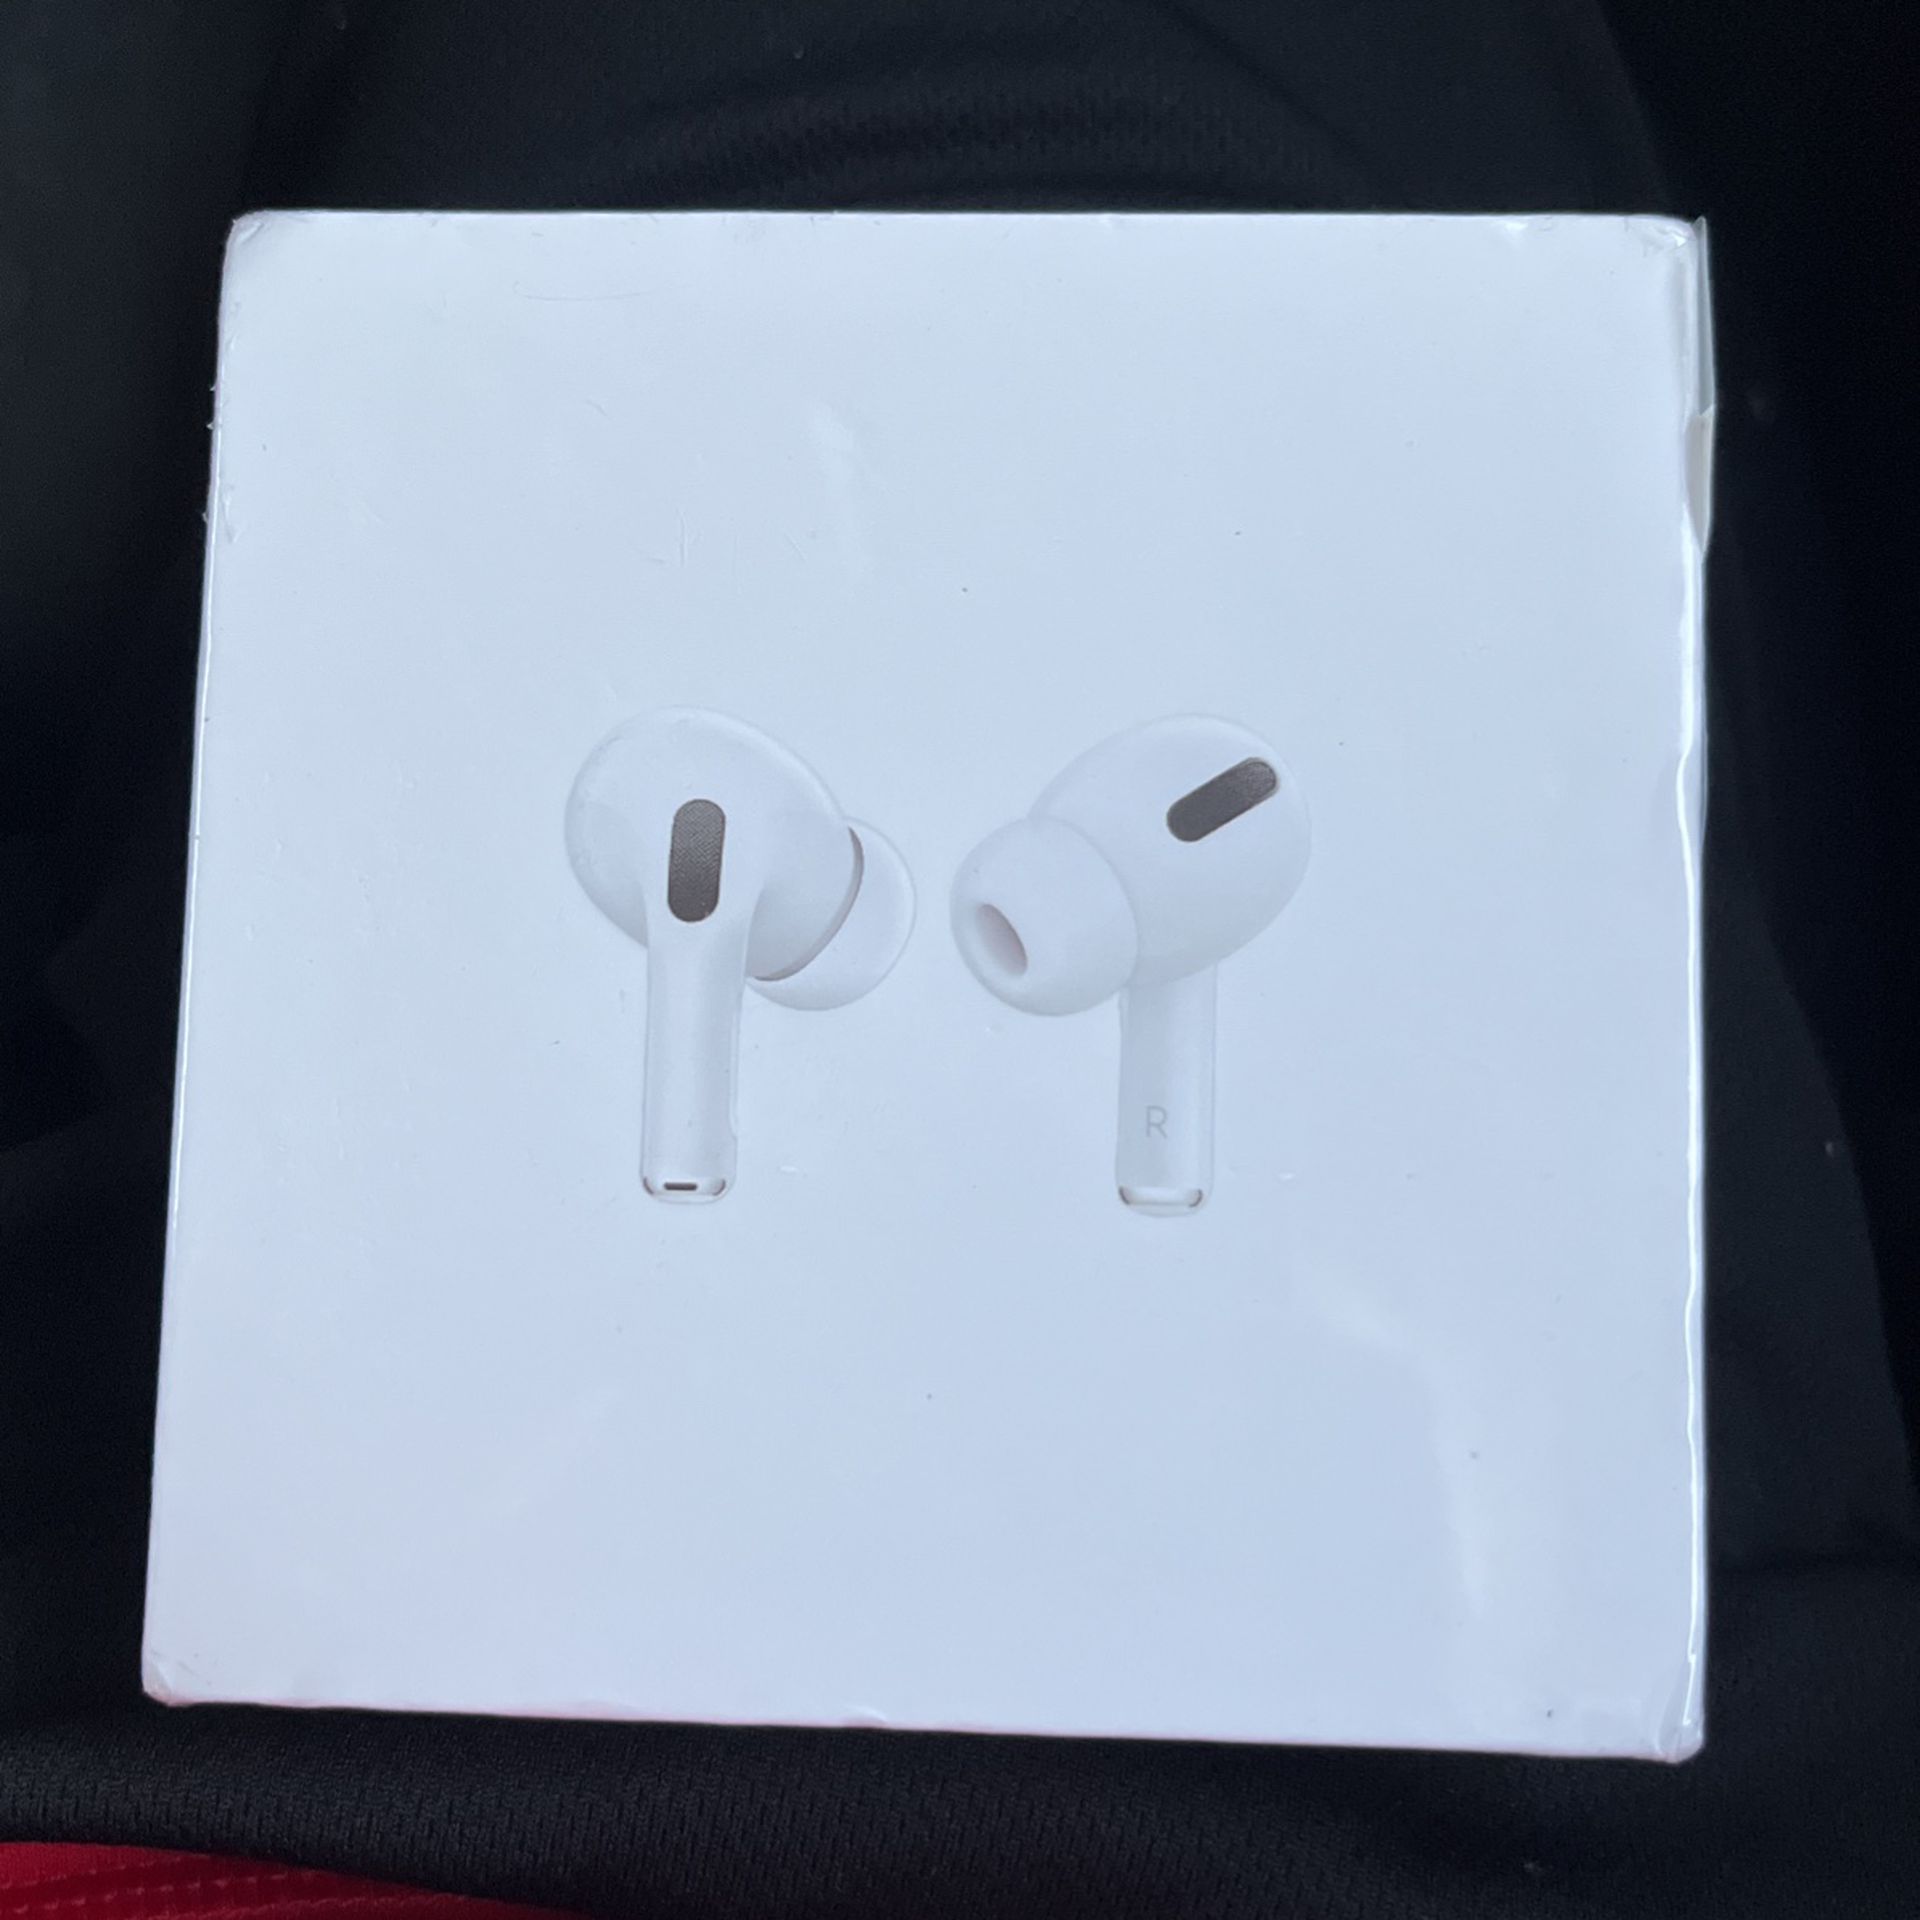 Airpod Pros For Sale